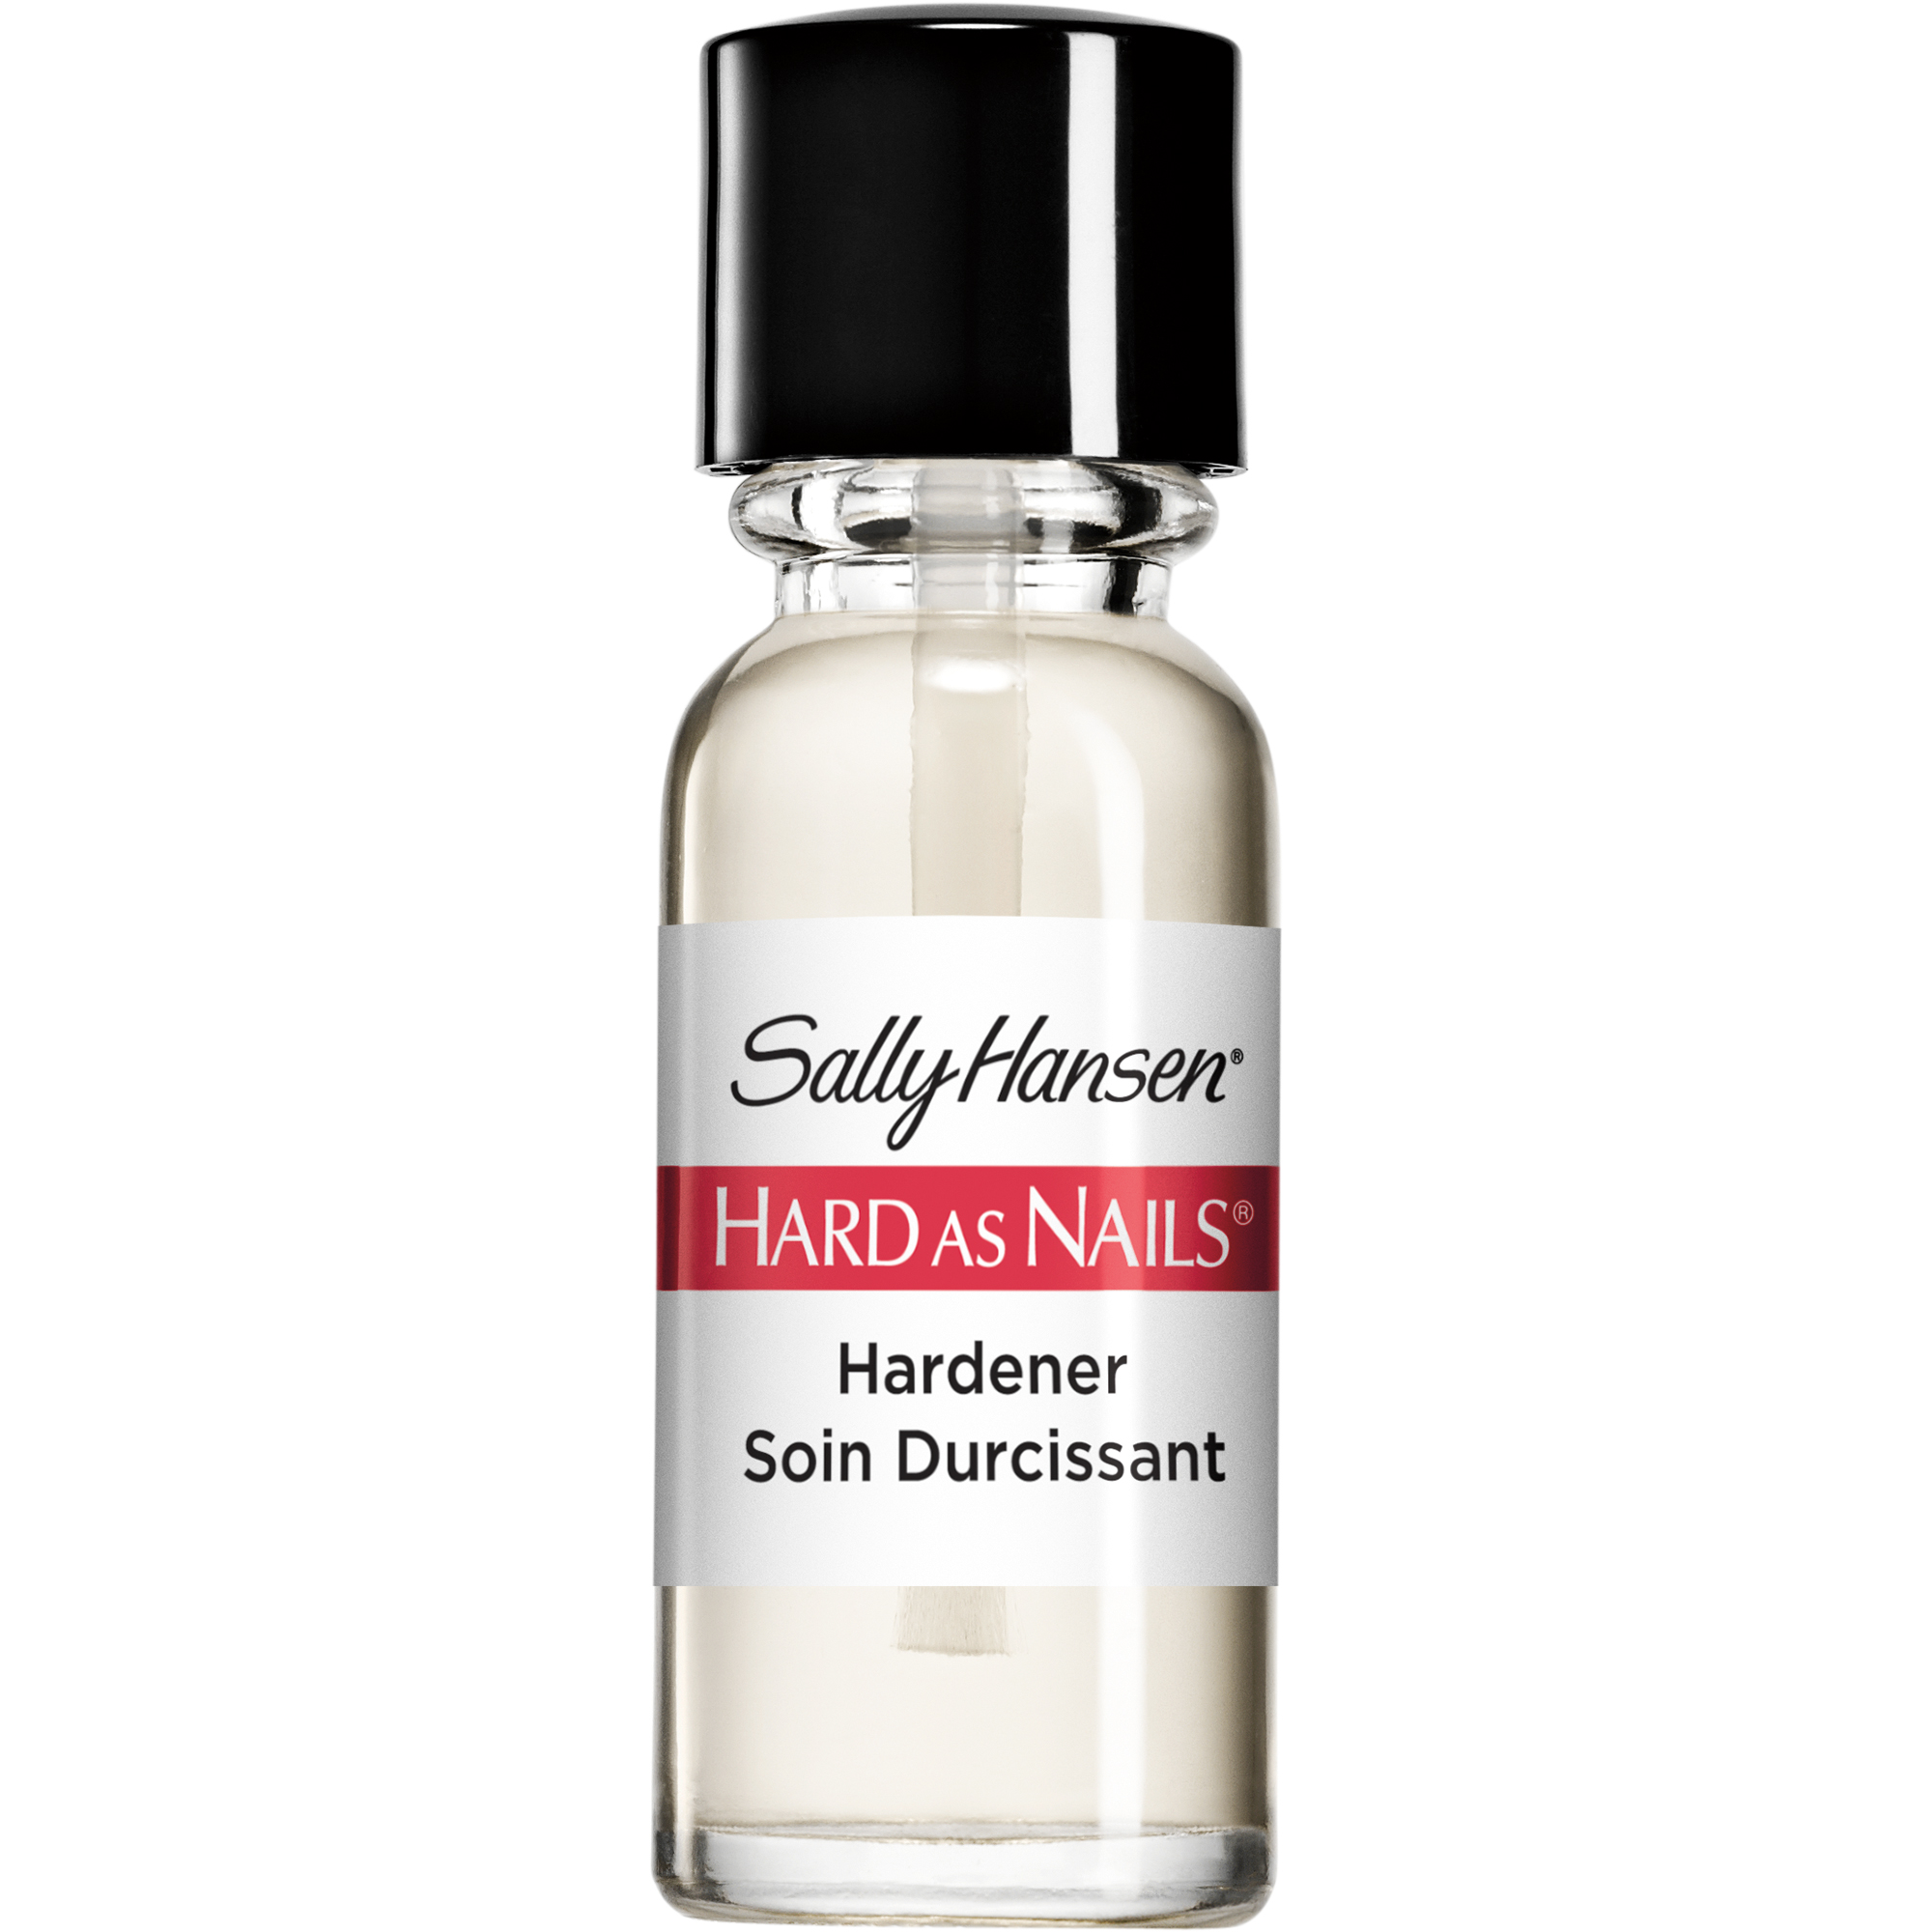 Sally Hansen Hard as Nails Strength Treatment - 45077 Clear Transparent 0.45 oz Nail Treatment - image 3 of 5